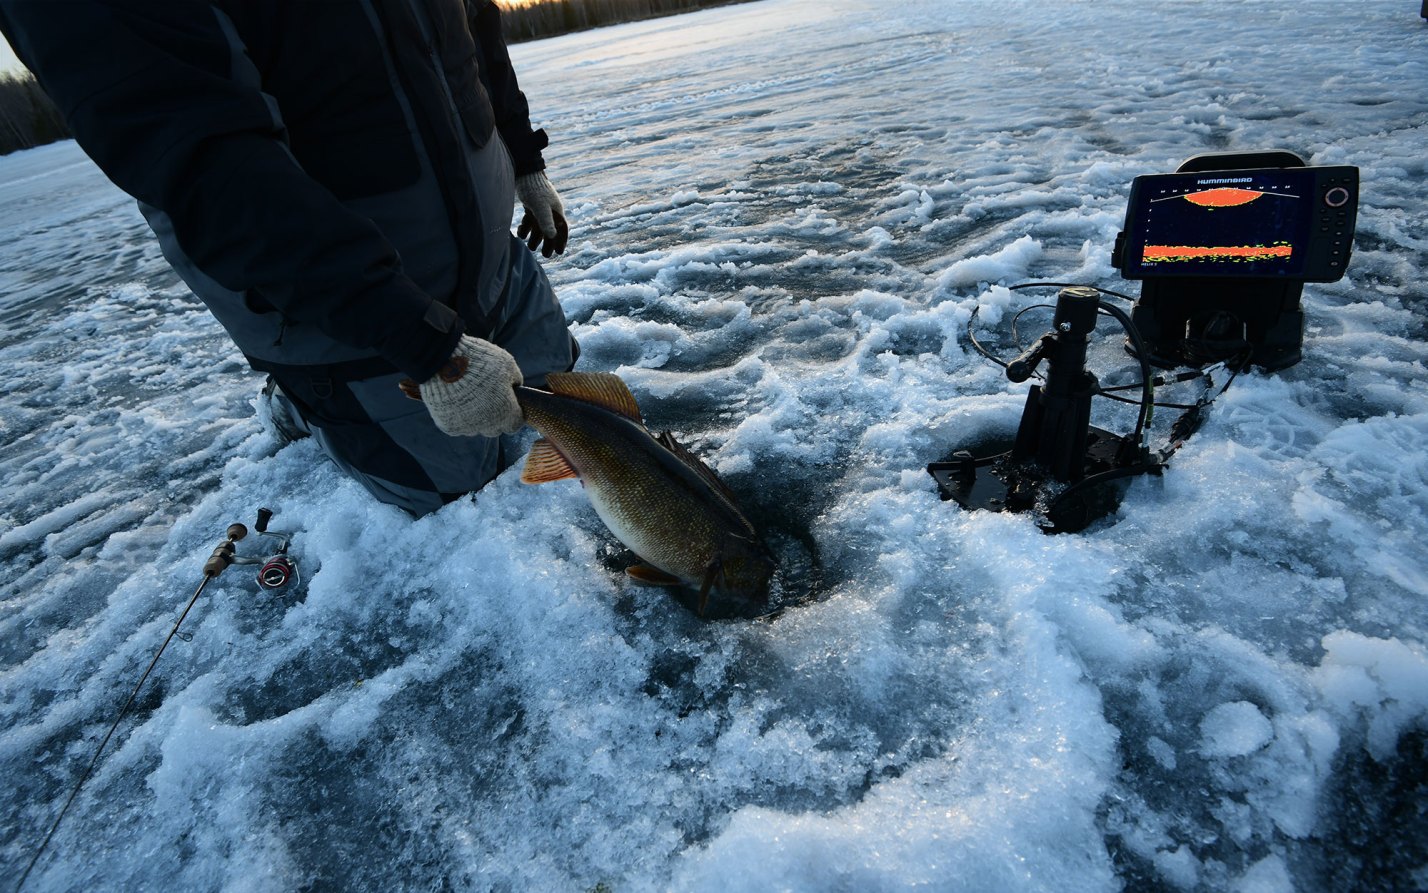 We tested and reviewed the three top forward-facing ice fishing sonars.